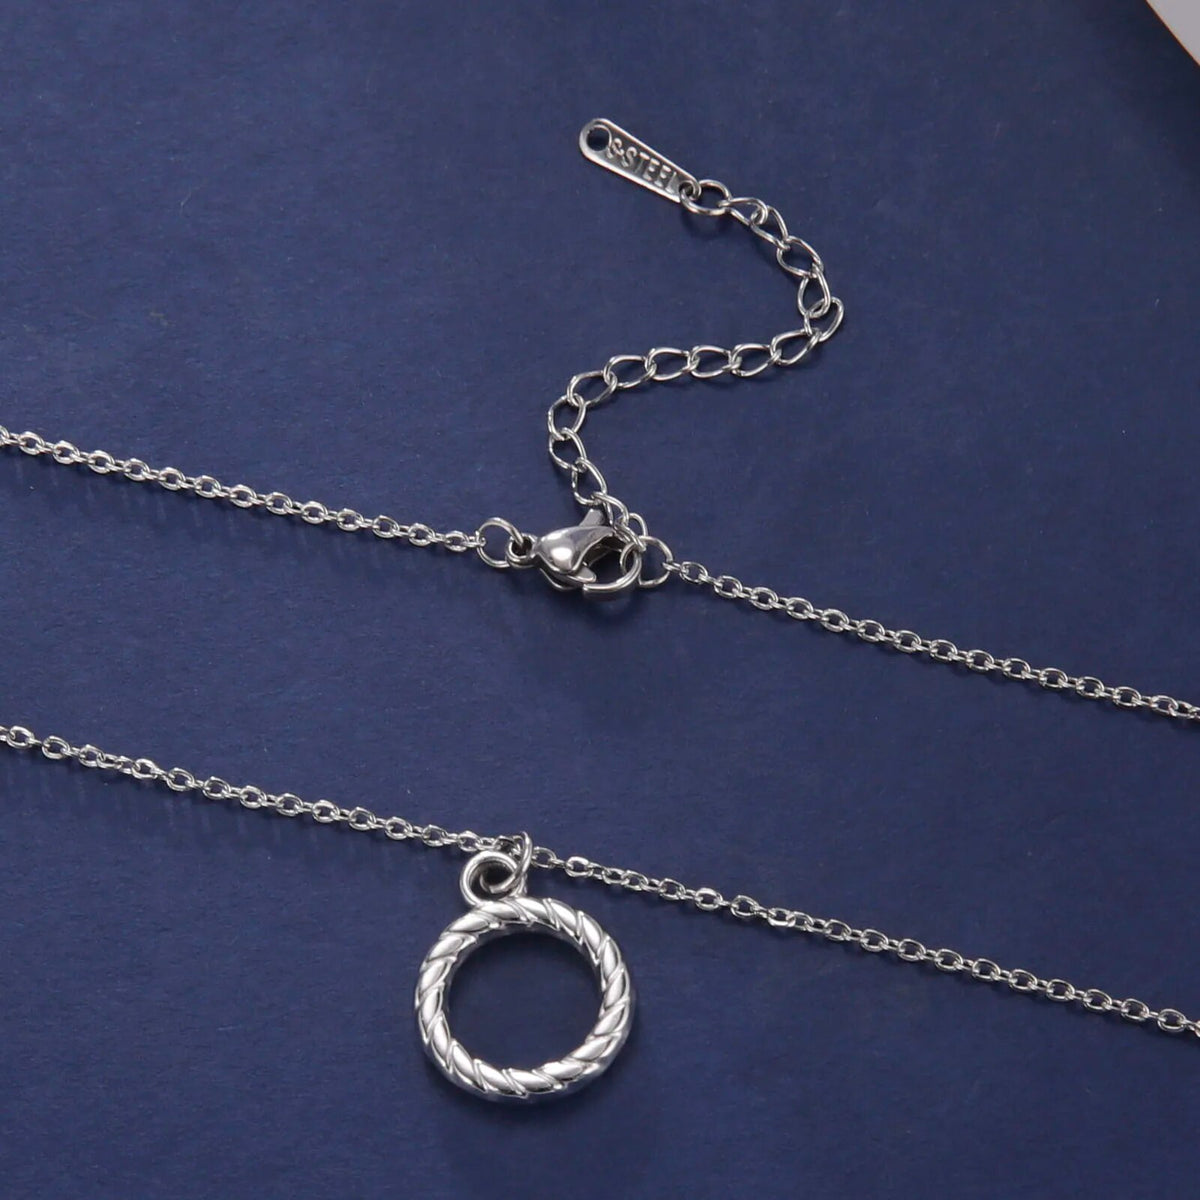 Minimalist Necklace with Round Pendant in Stainless Steel